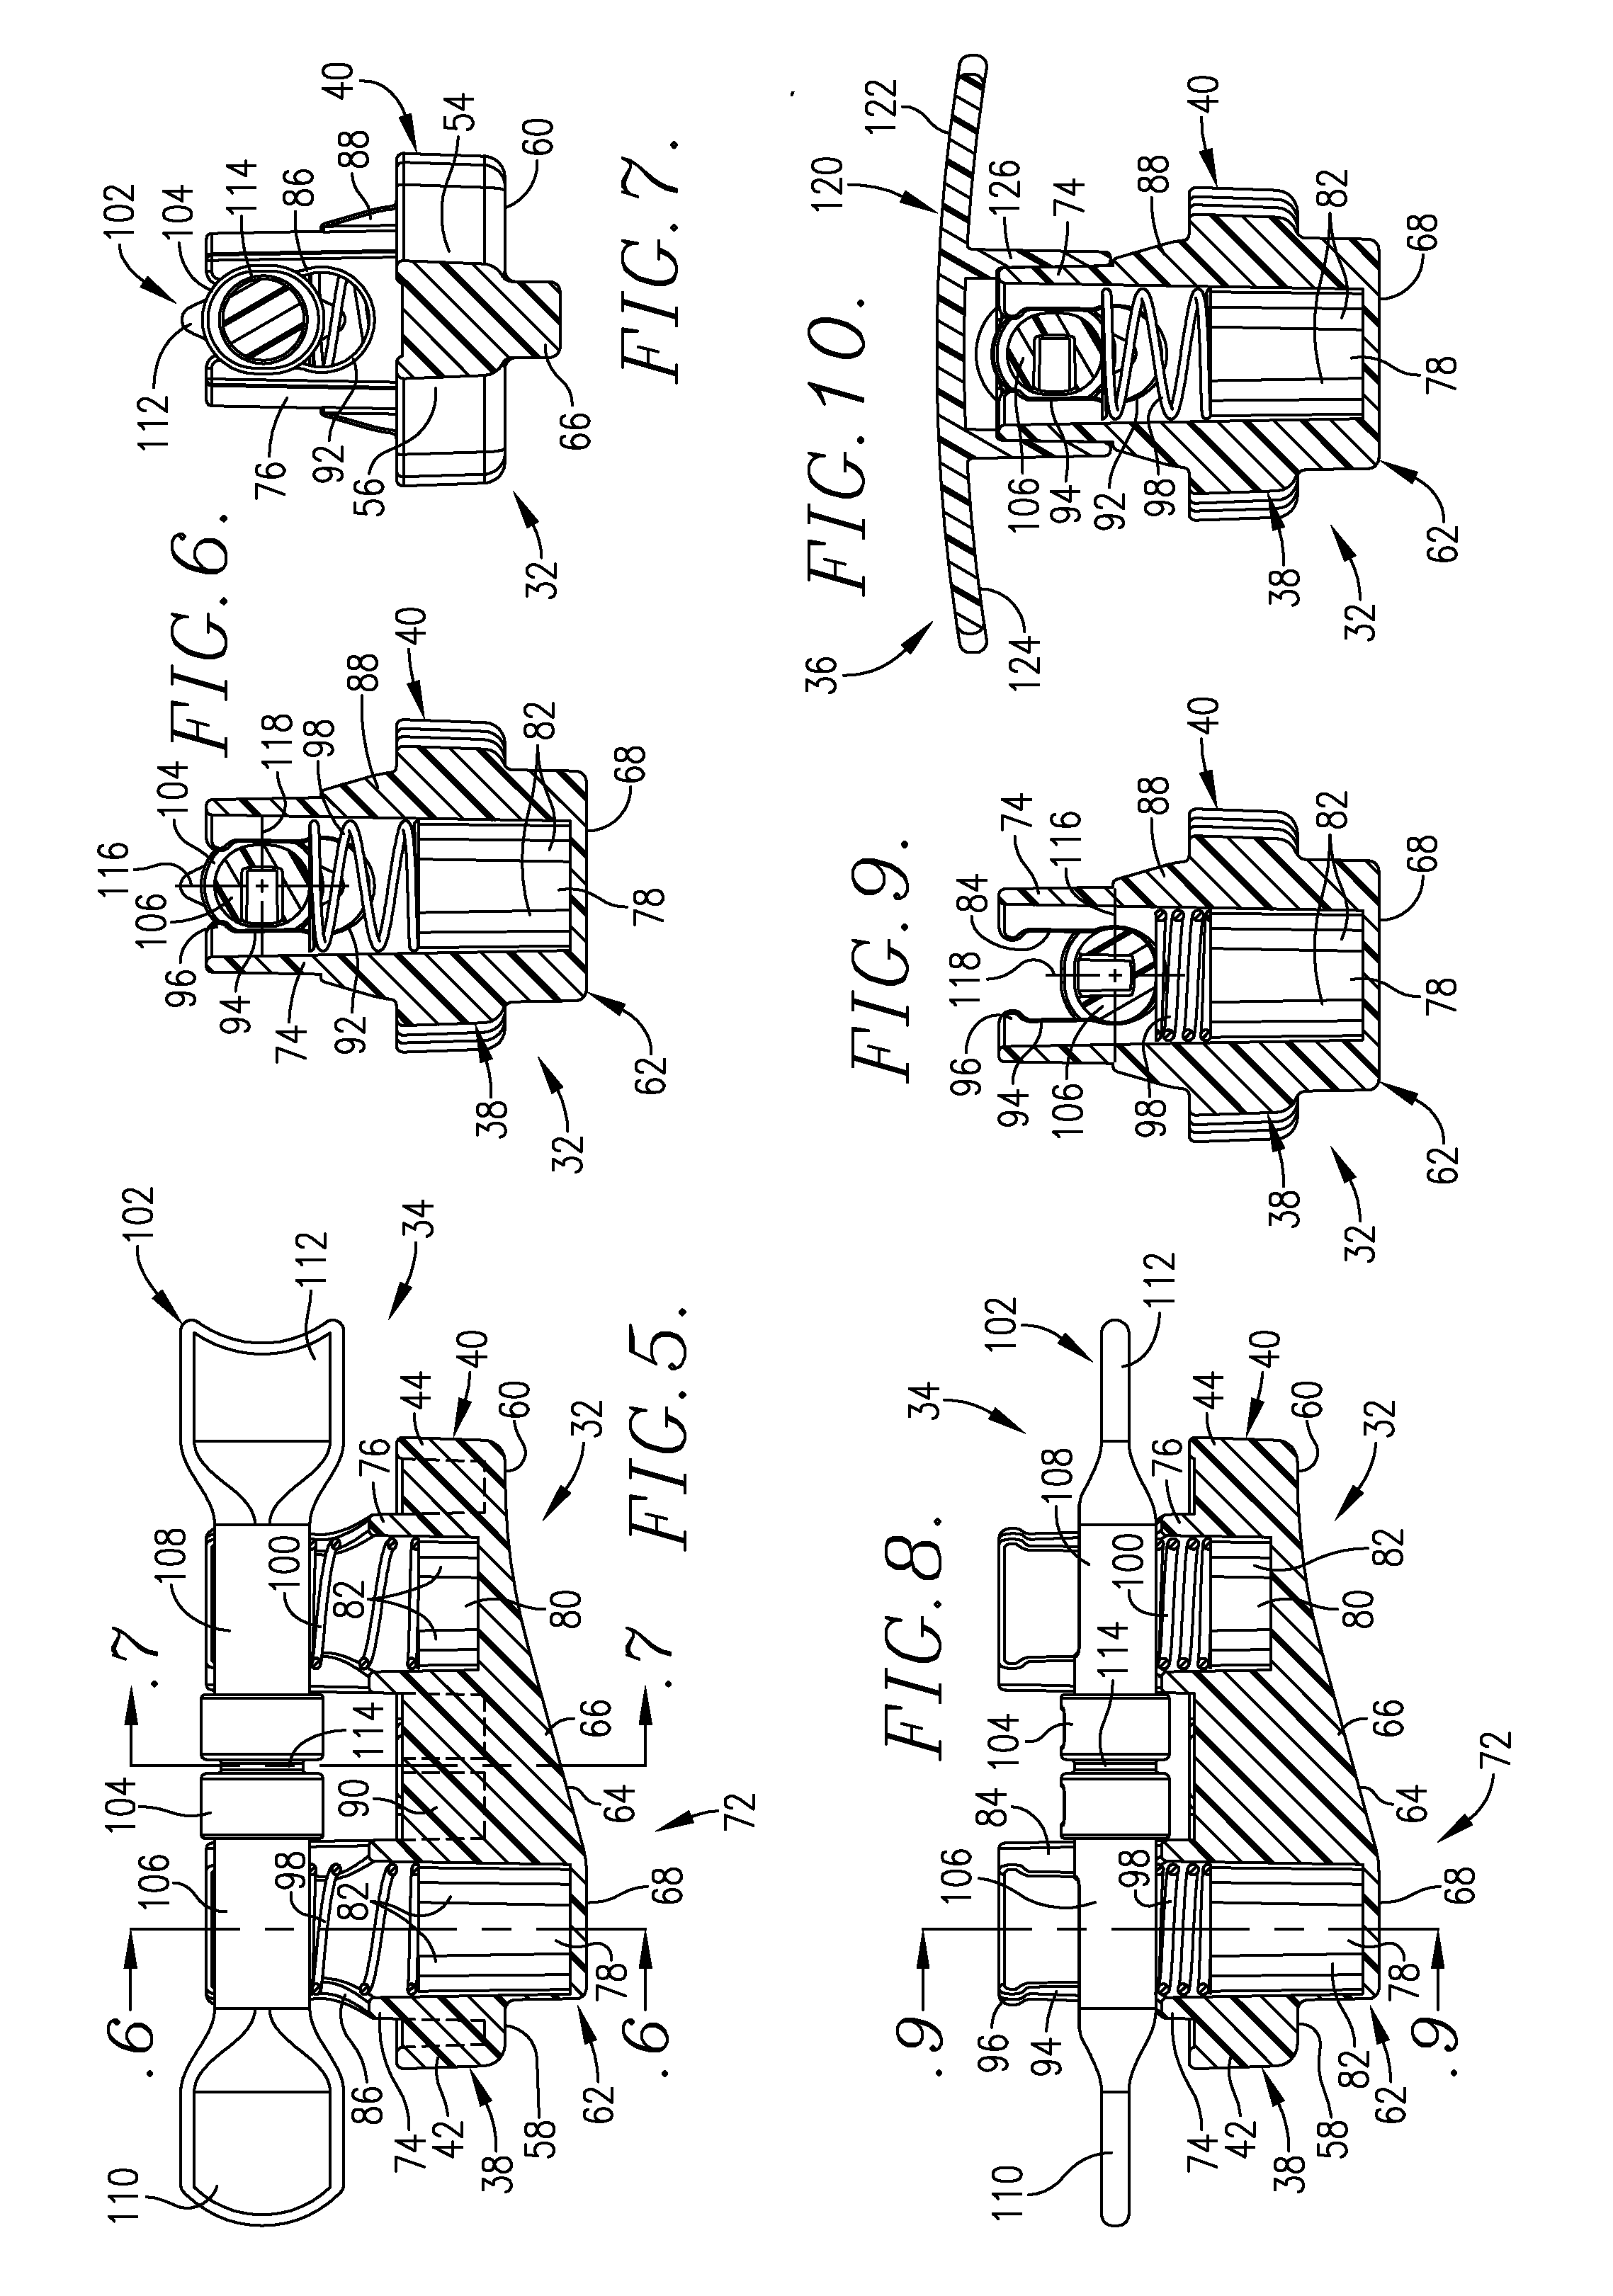 Vascular wound closing apparatus and method